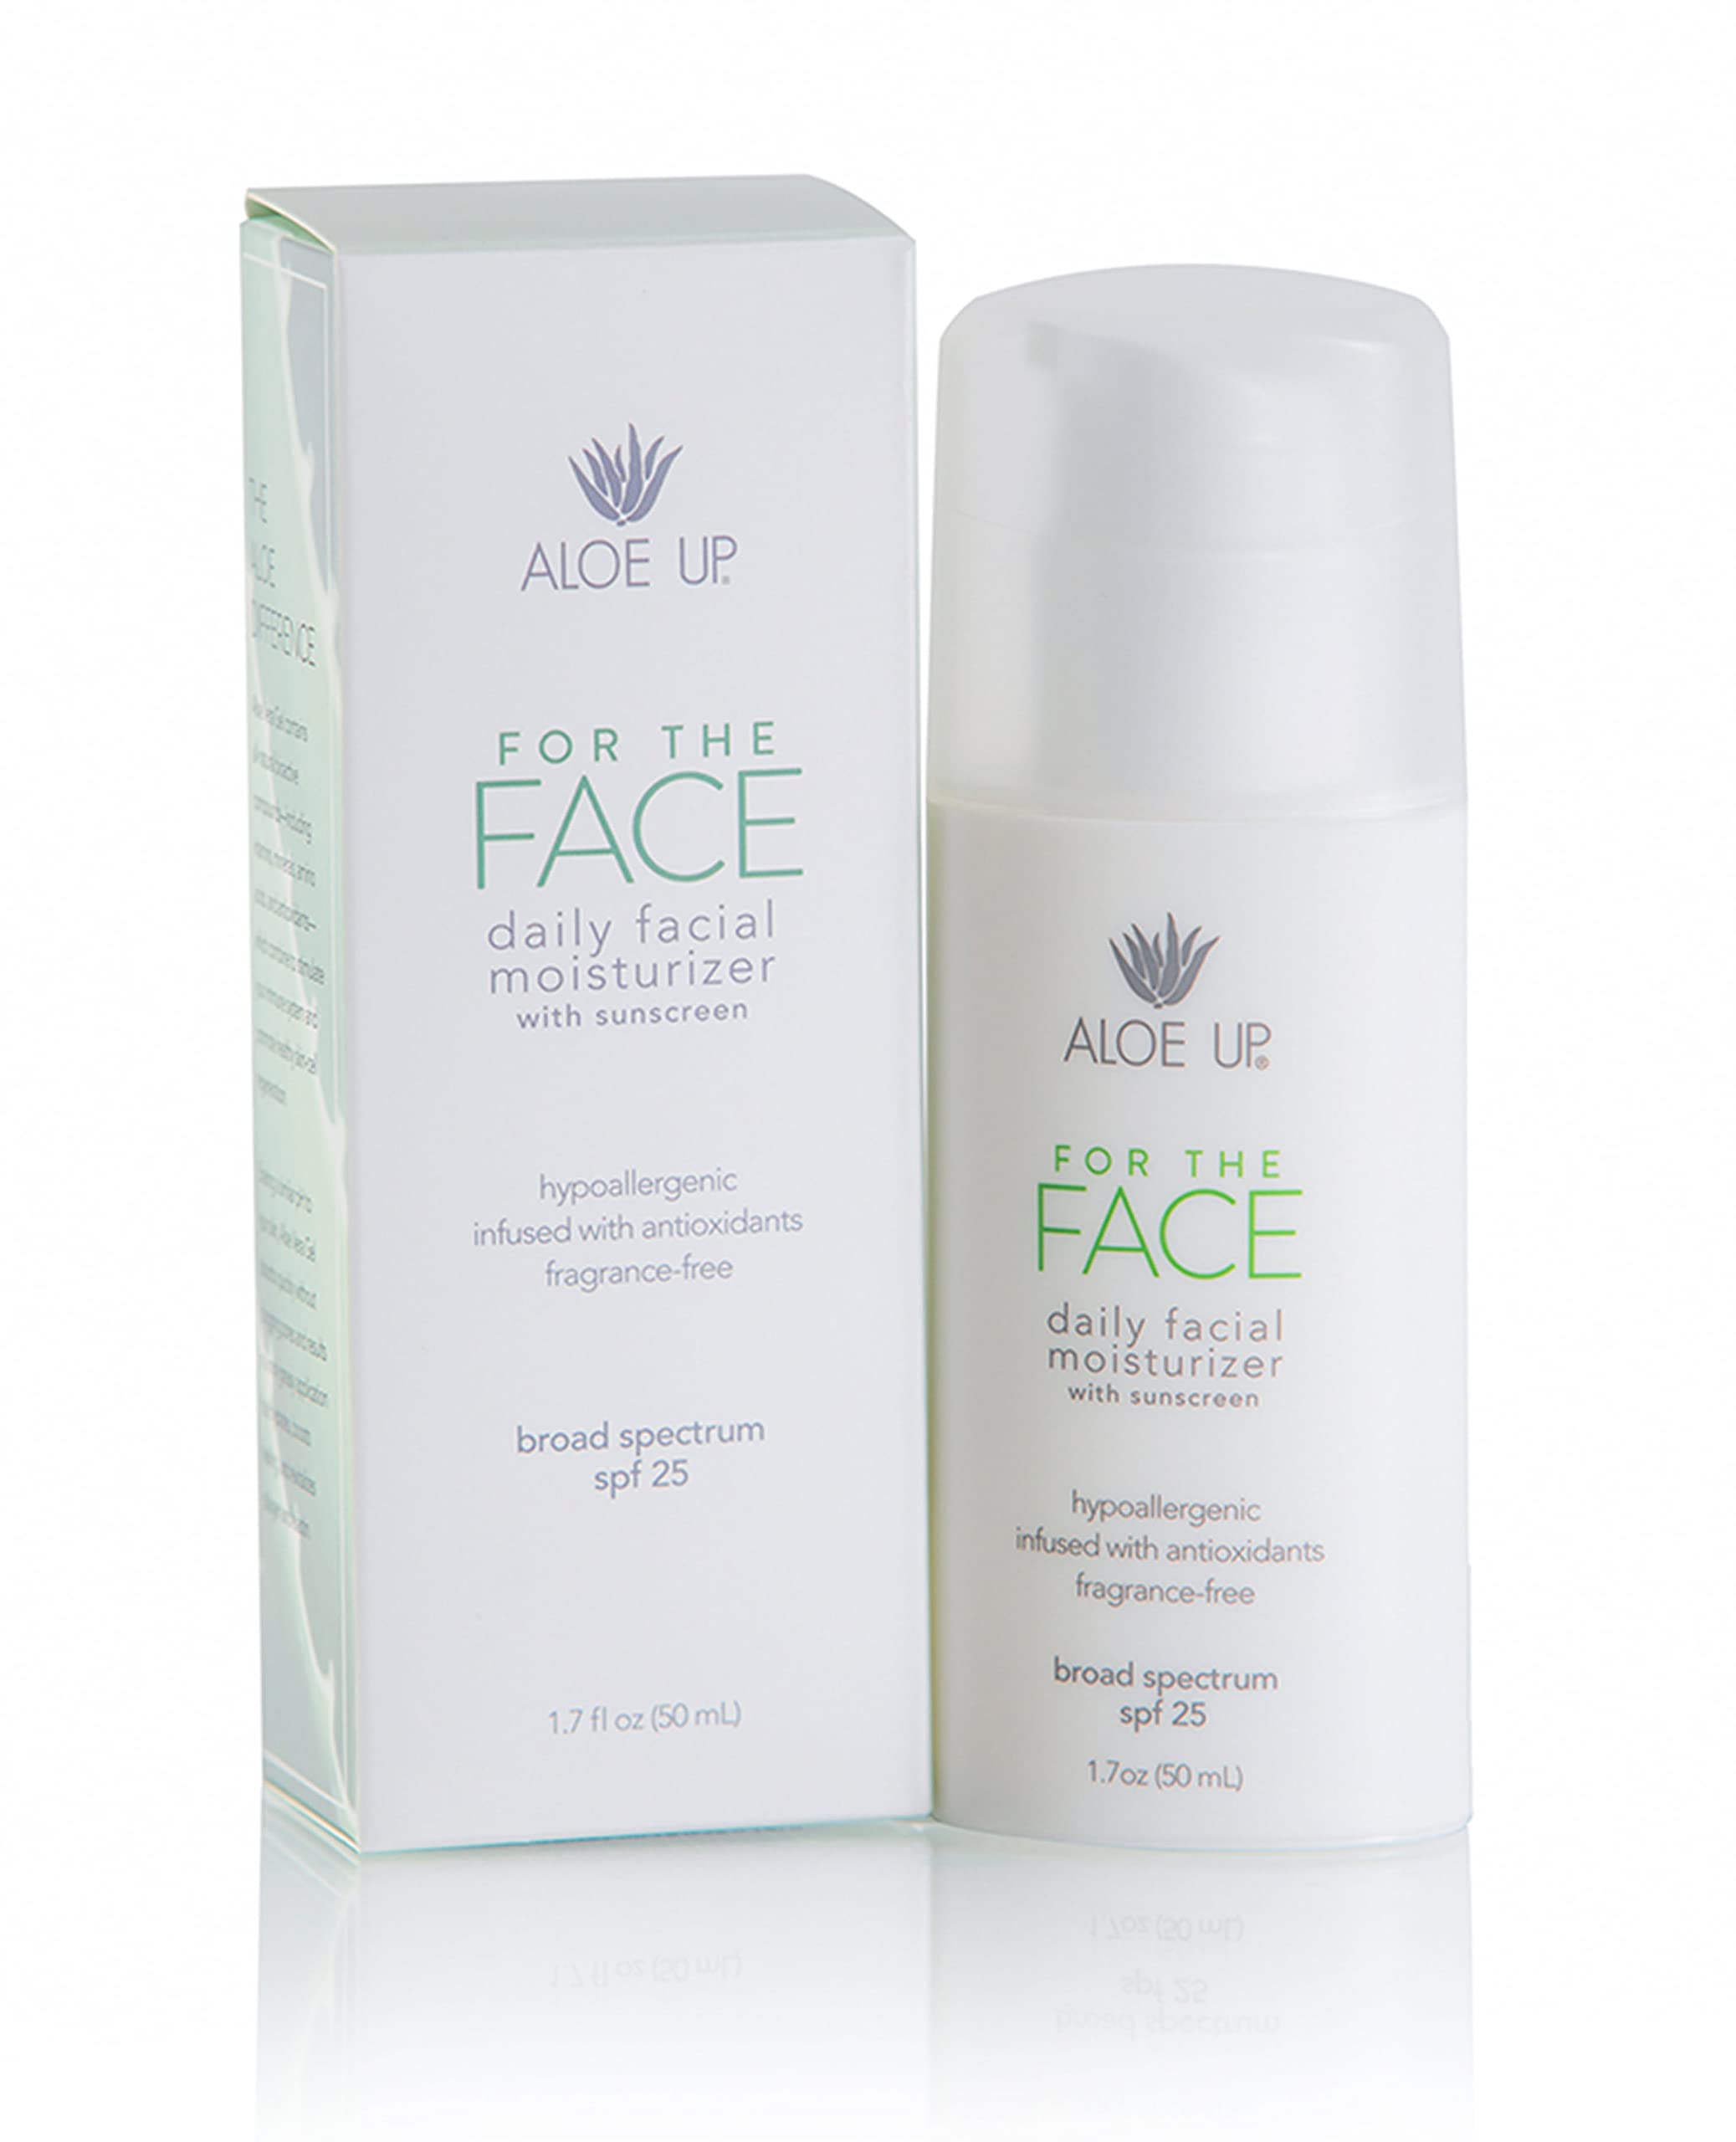 Aloe Up Daily Face Moisturizer with SPF 25 - Non Greasy & Quick Absorbing Sun Skin Care, Reef Friendly & Water Resistant, Aloe Skin Sun Protection, Sunscreen Lotion with UVA/UVB Protection - 1.7 Fl Oz